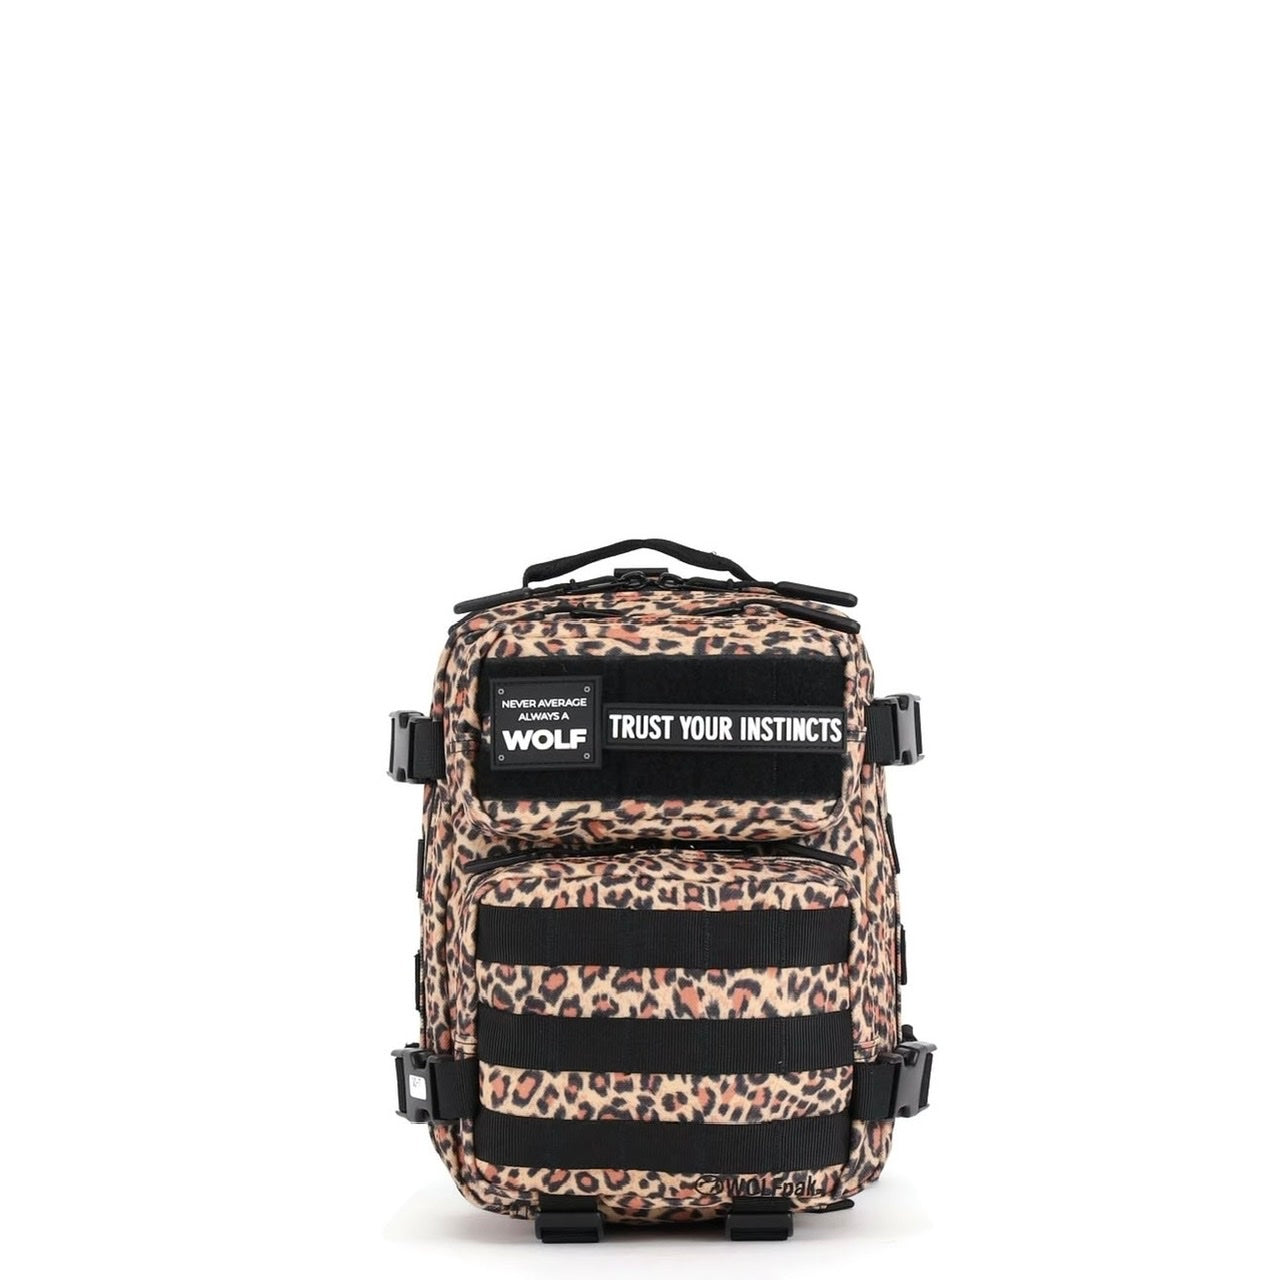 9L Backpack Mini Leopard Limited Edition